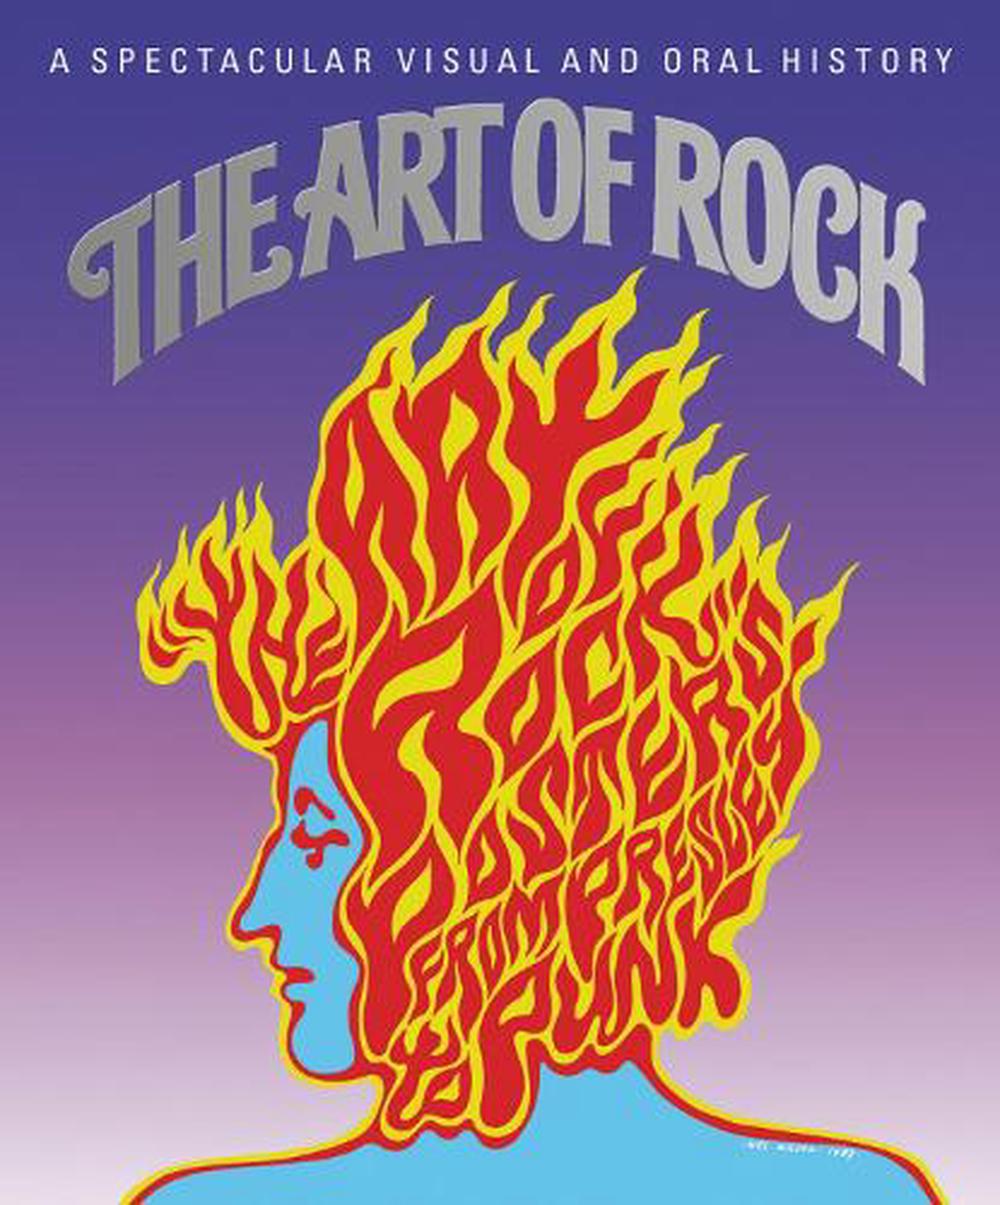 The Art of Rock (Hardcover) - image 1 of 1